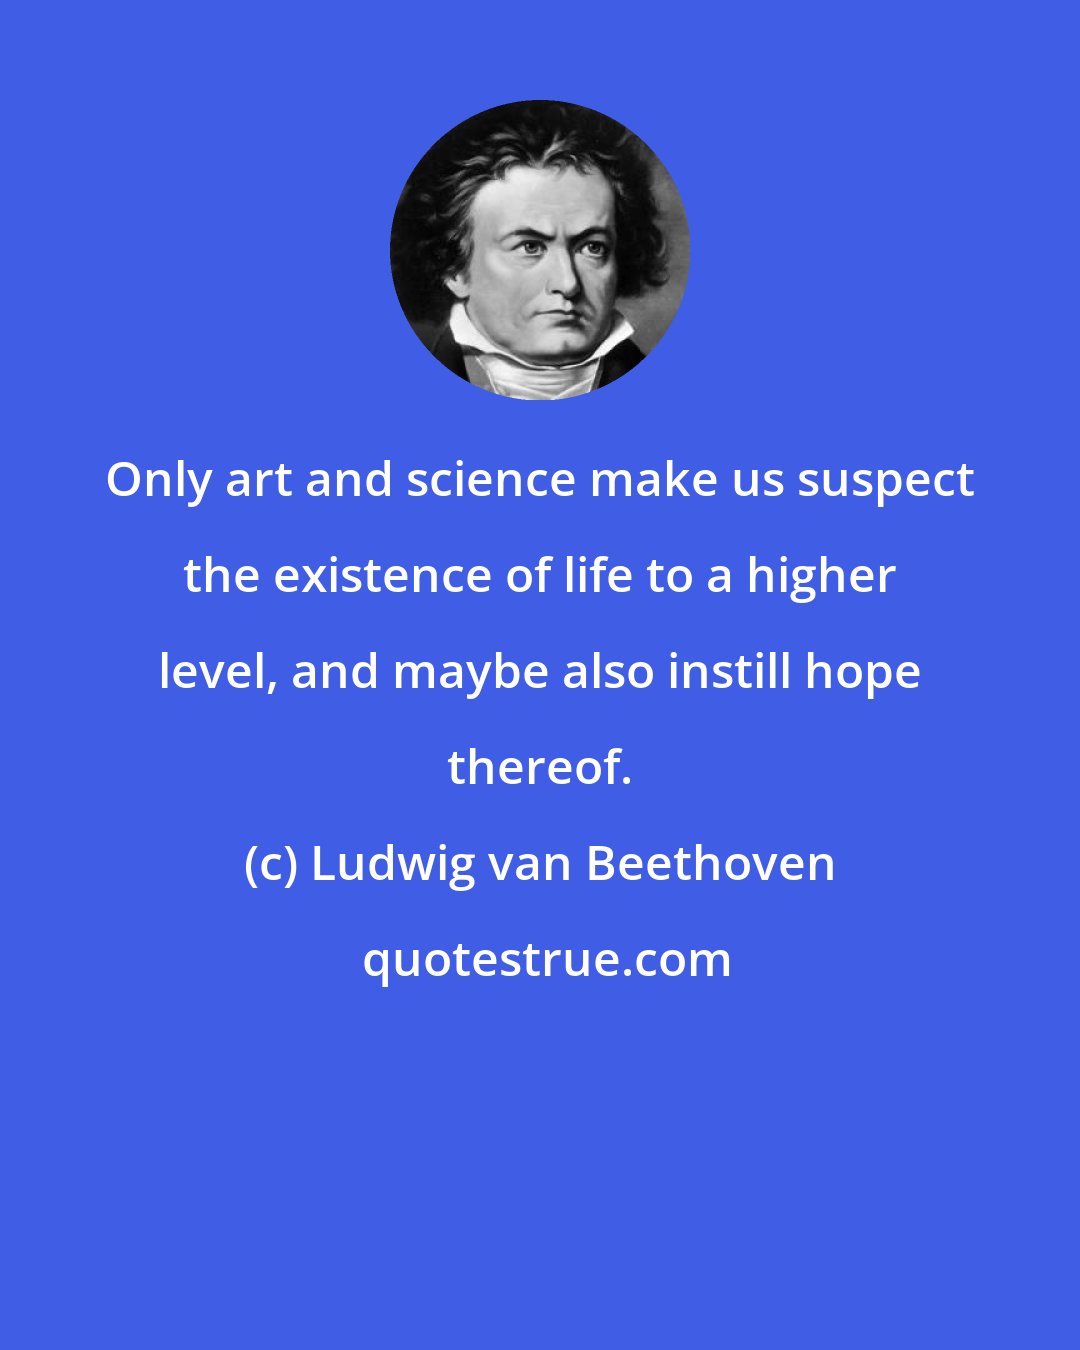 Ludwig van Beethoven: Only art and science make us suspect the existence of life to a higher level, and maybe also instill hope thereof.